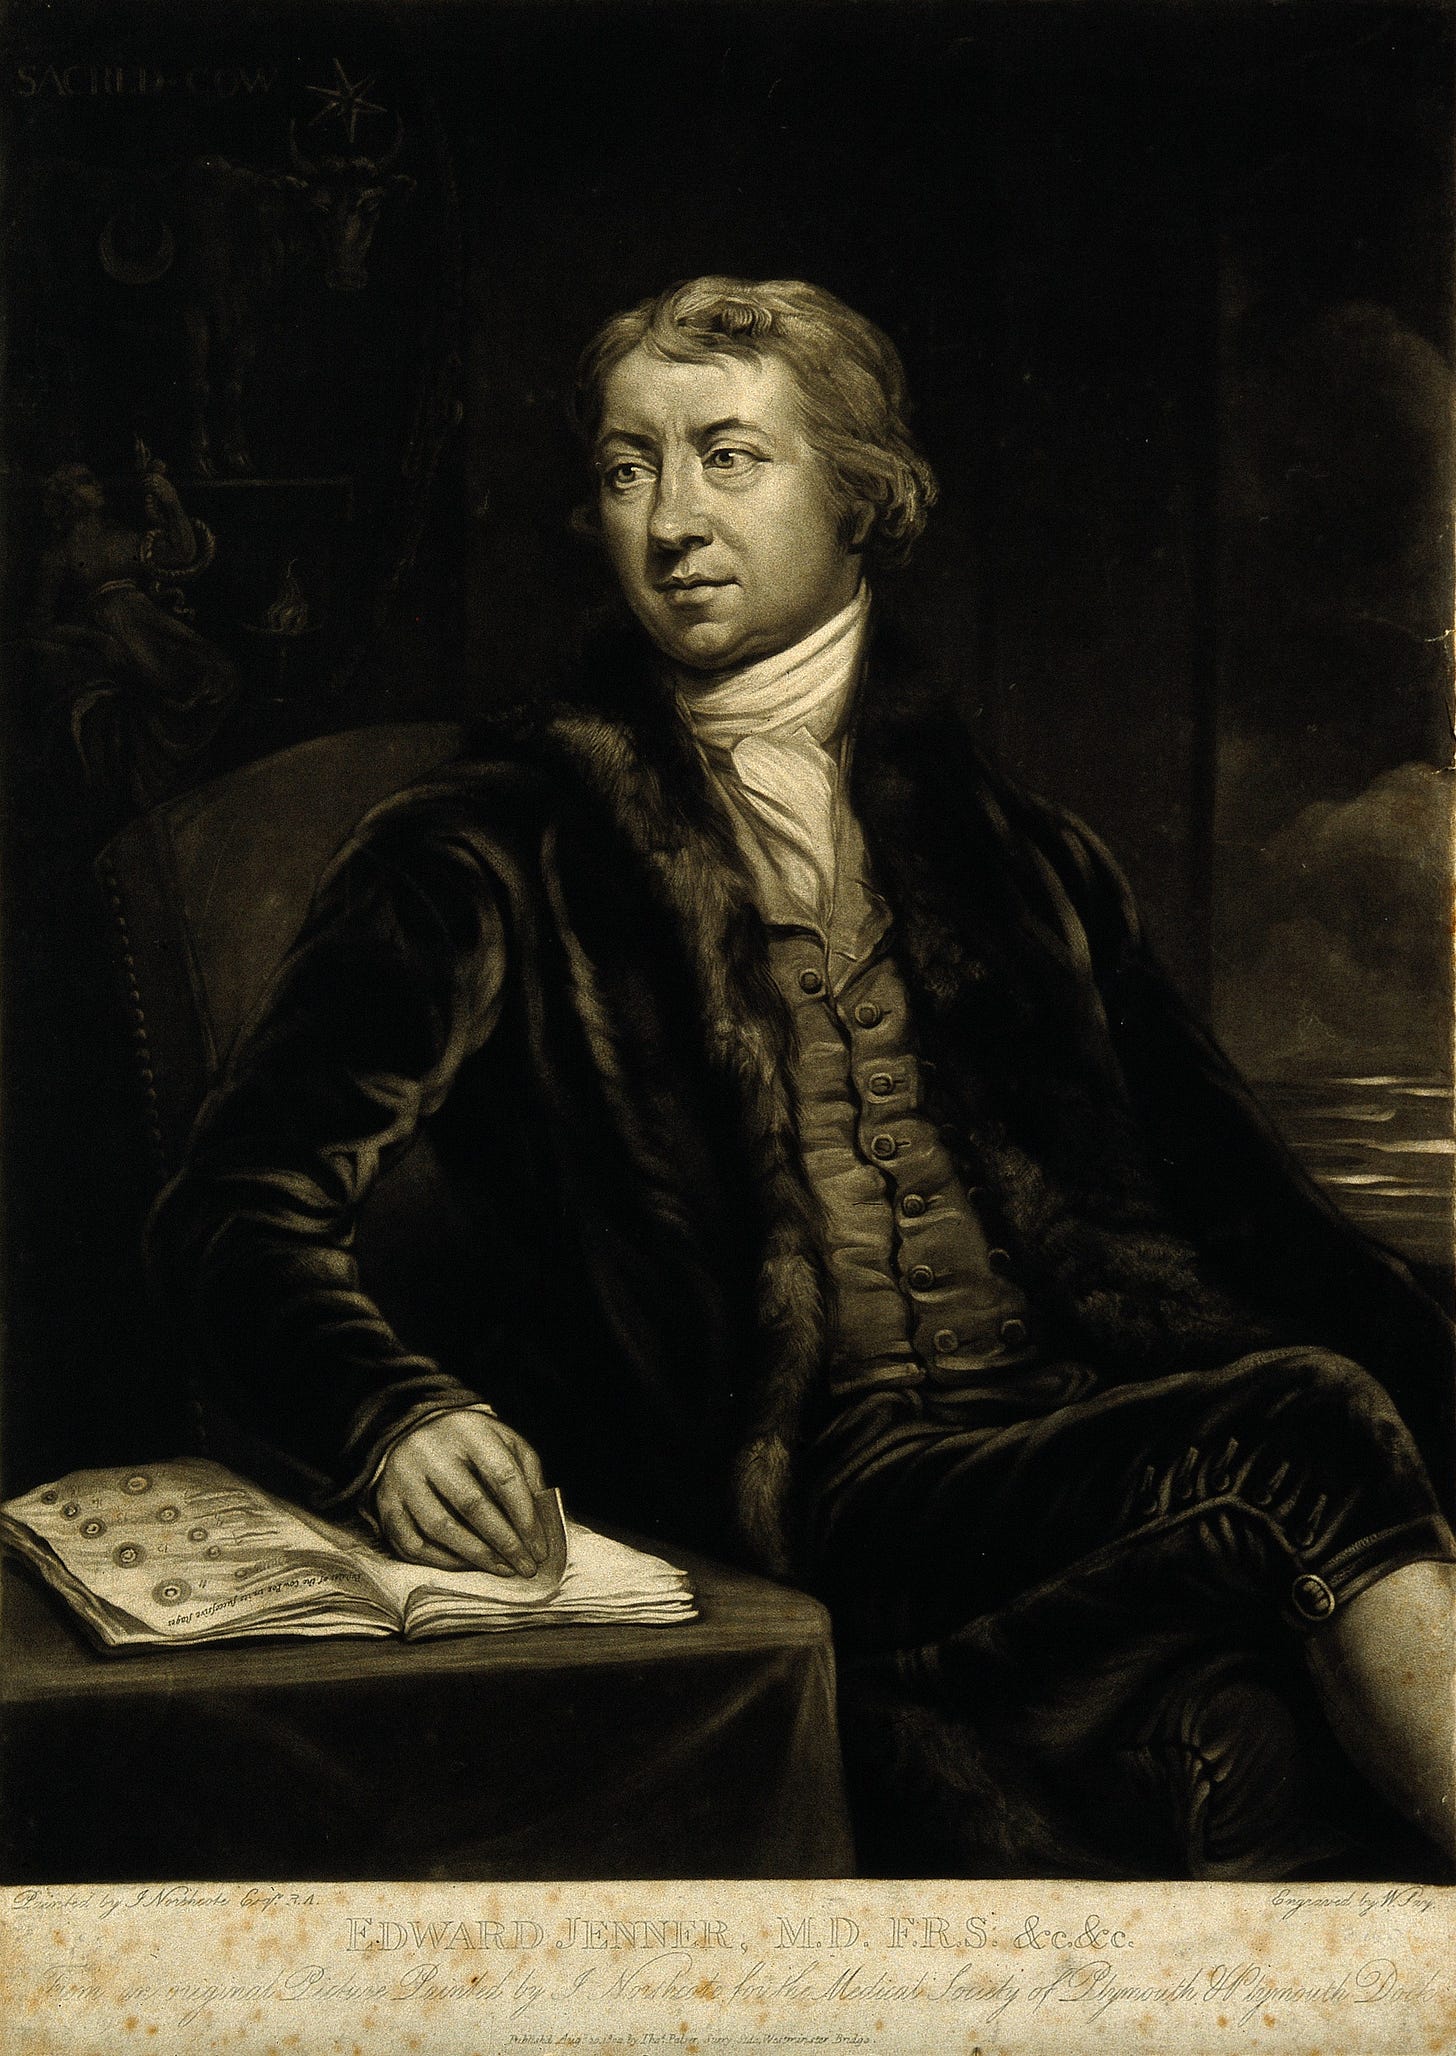 File:Edward Jenner. Mezzotint by W. Say after J. Northcote, 1802. Wellcome  V0003088.jpg - Wikimedia Commons